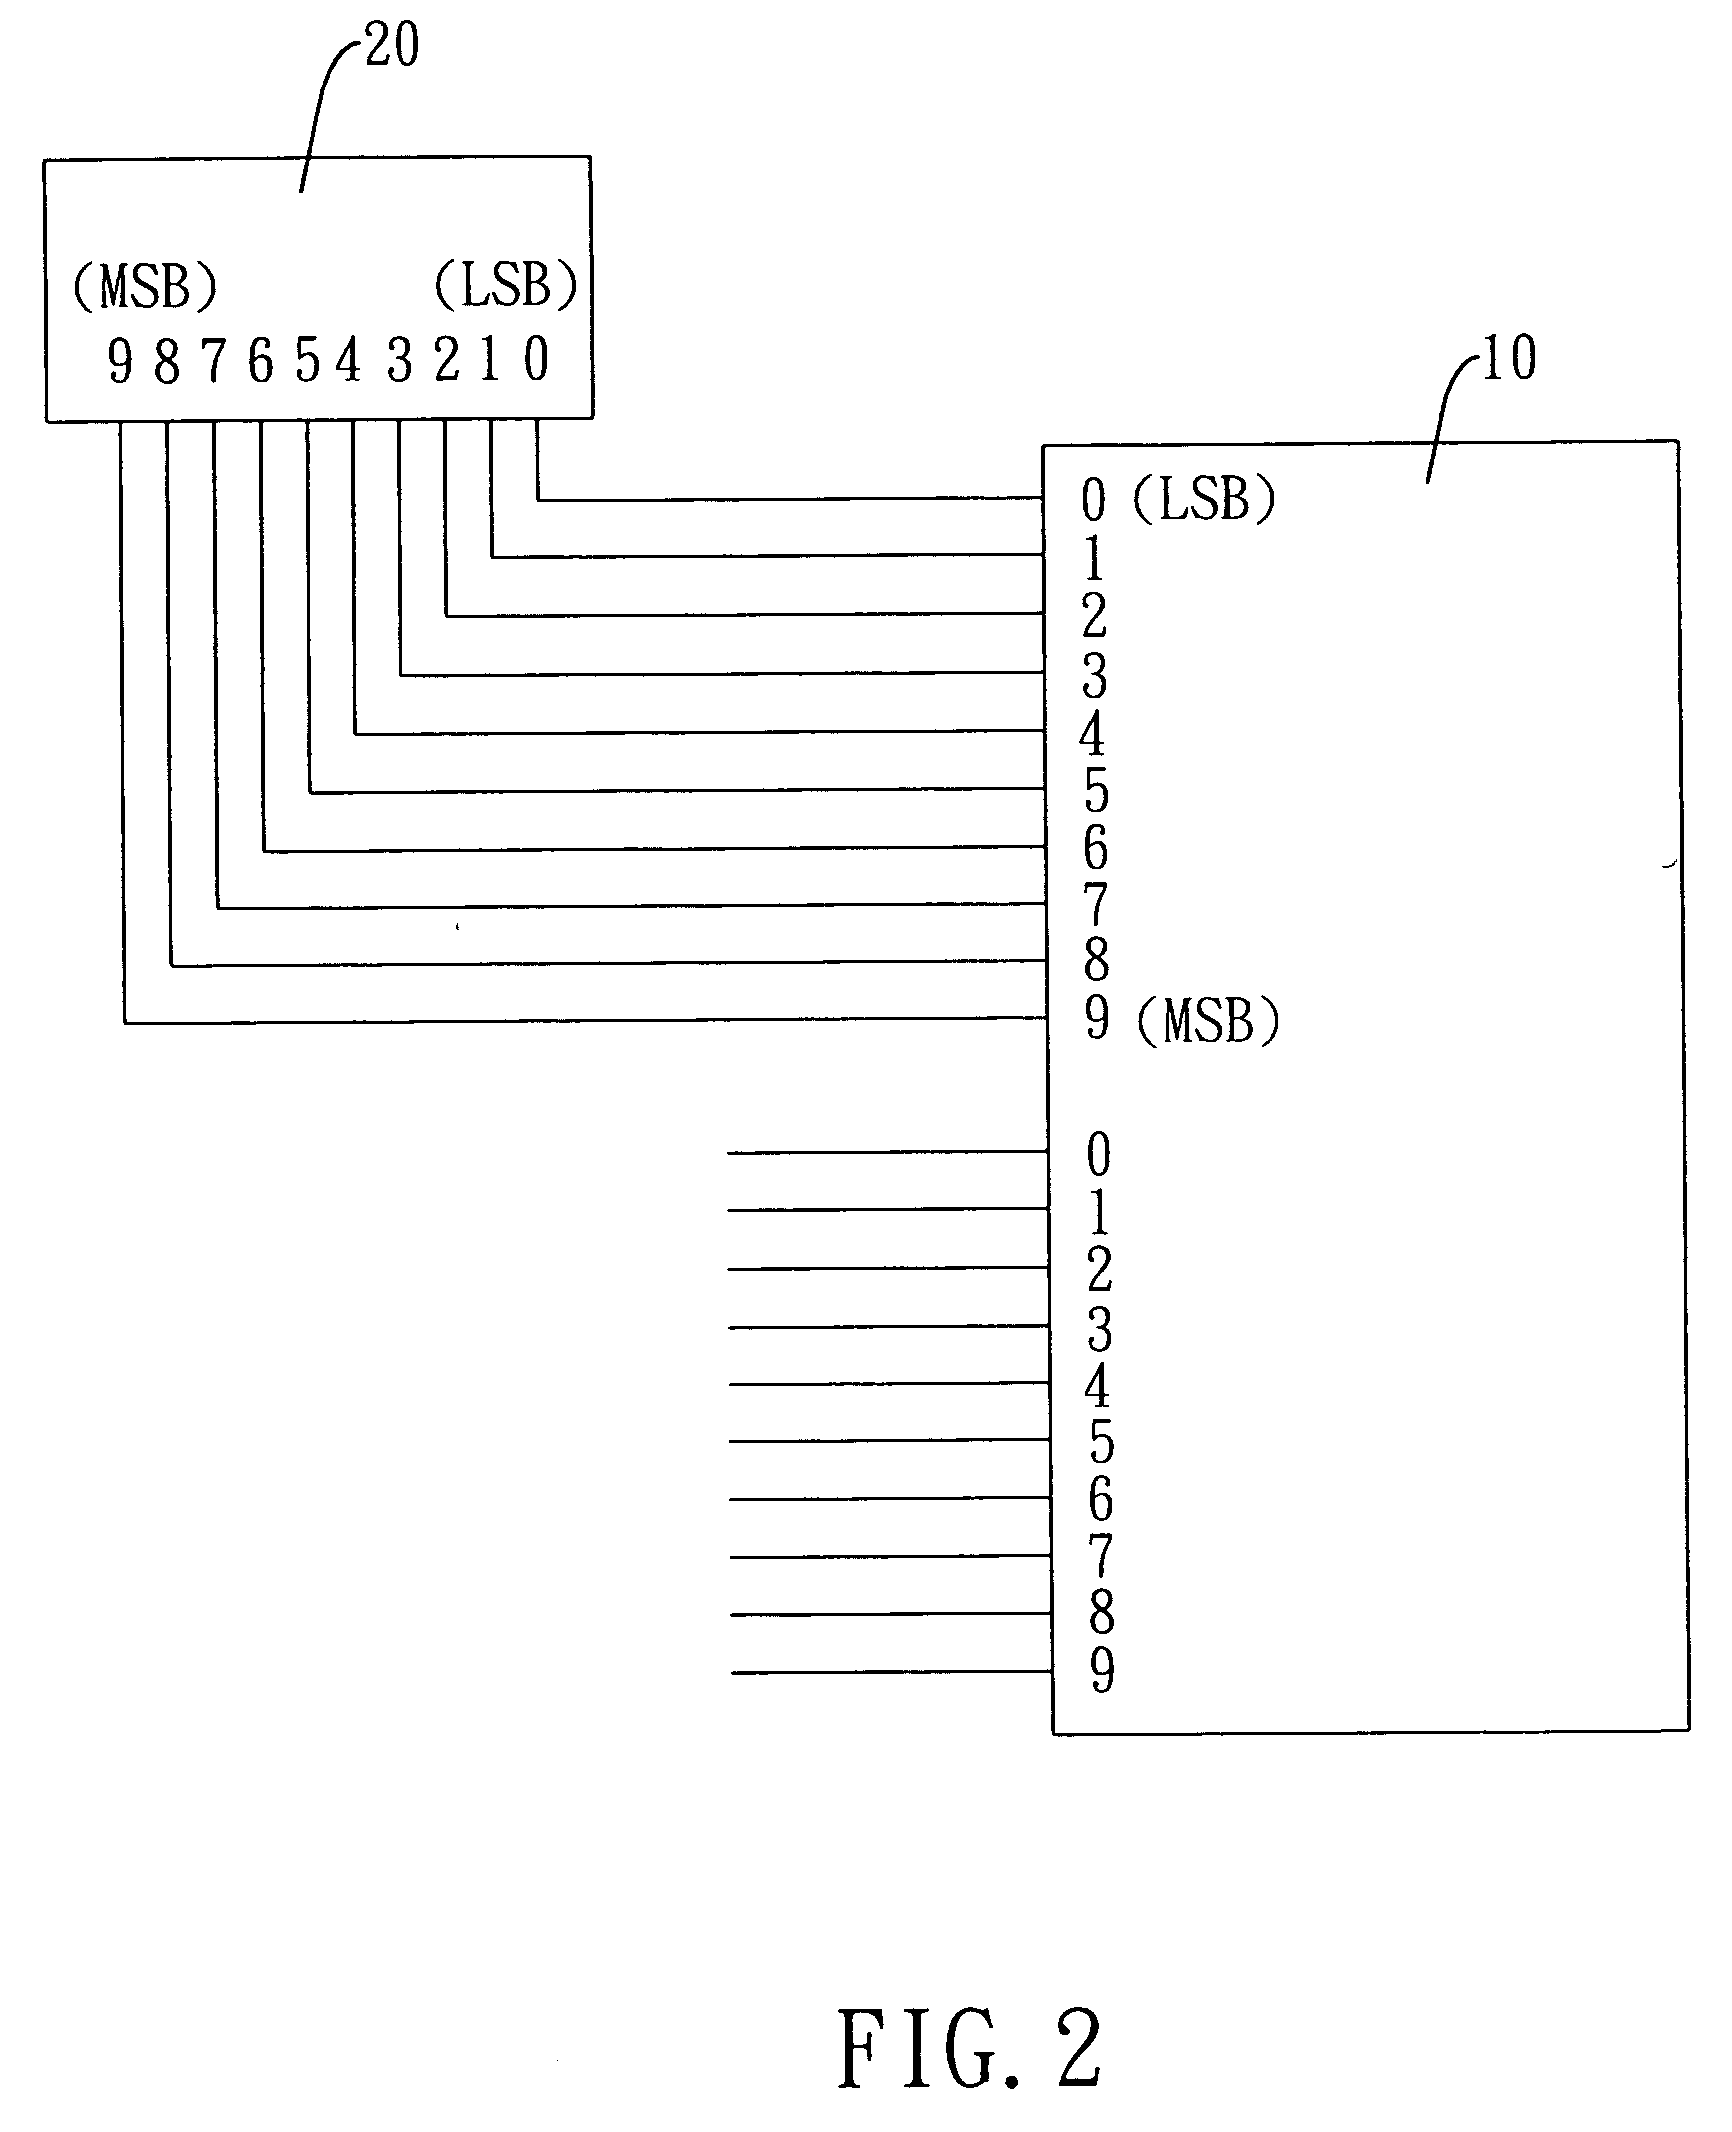 Multi-channel display driver circuit incorporating modified D/A converters